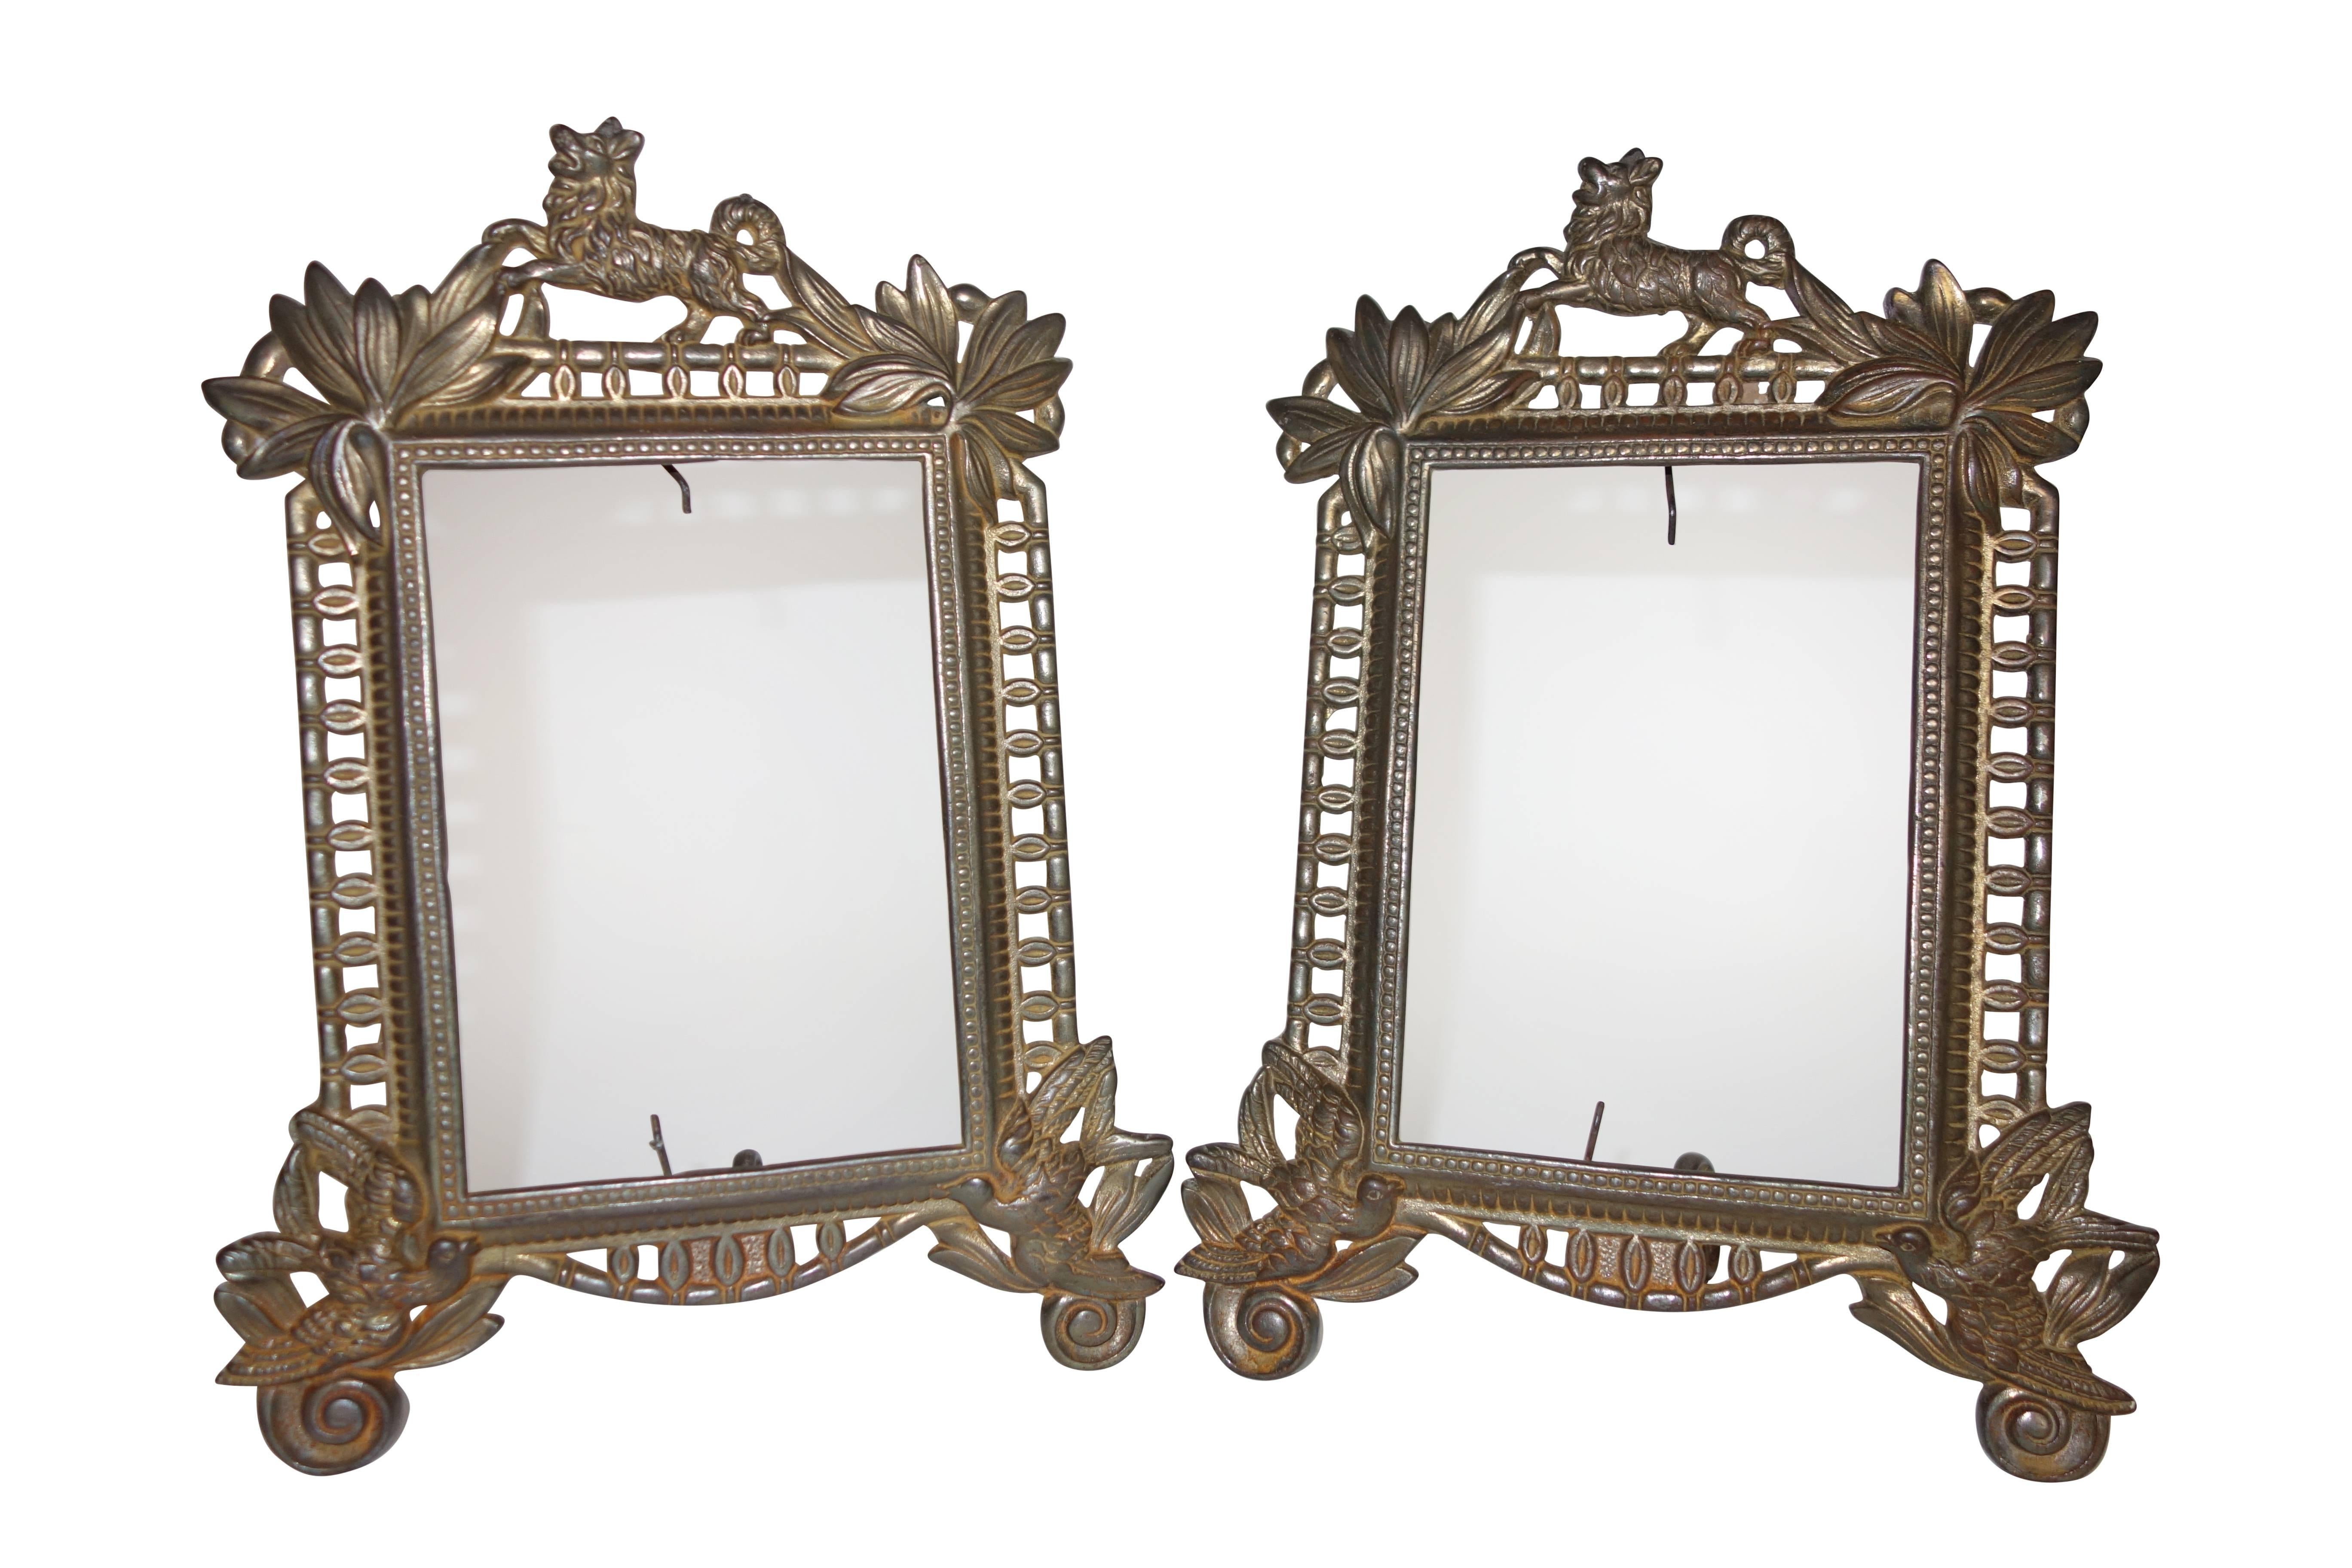 Pair of 19th Century French Gilt Frames with Dogs and Birds 1